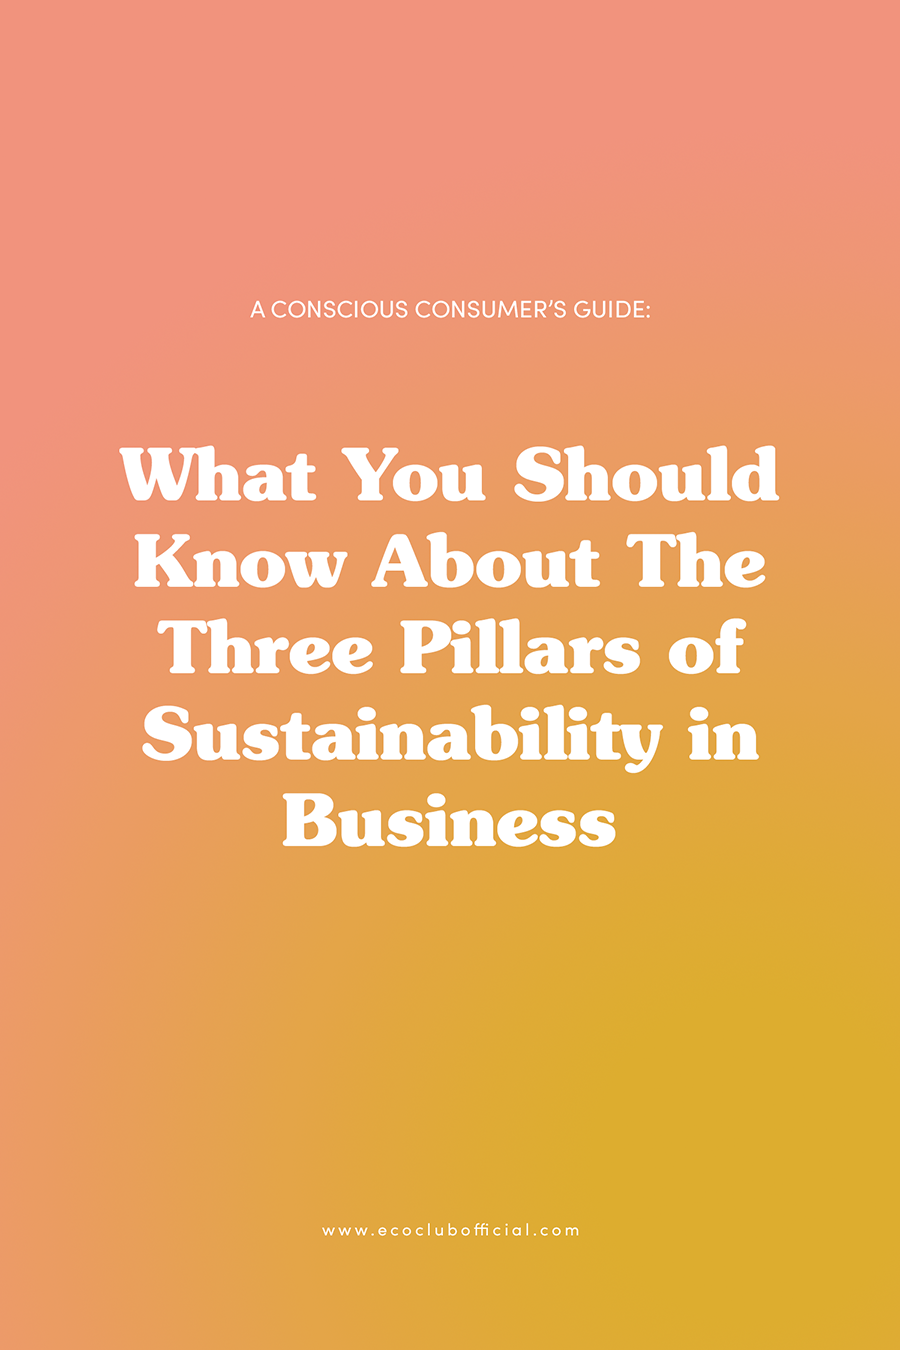 What You Should Know About The Three Pillars of Sustainability